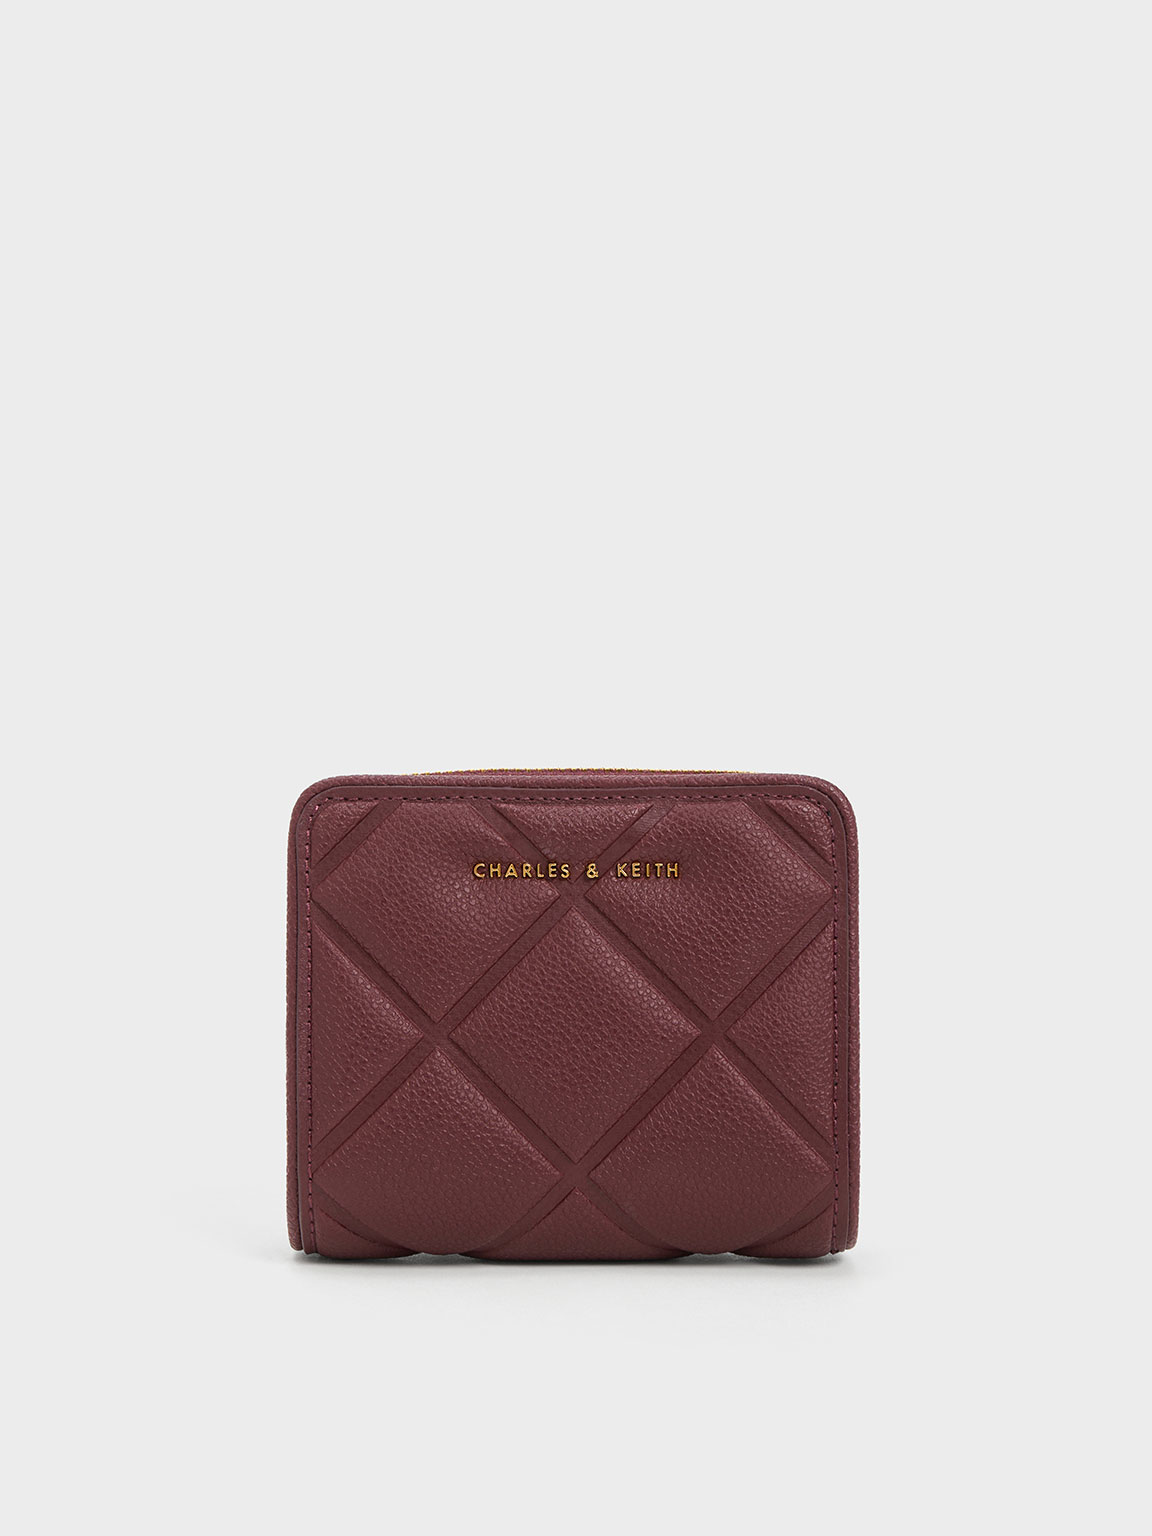 Cobalt Lillie Quilted Mini Wallet - CHARLES & KEITH US